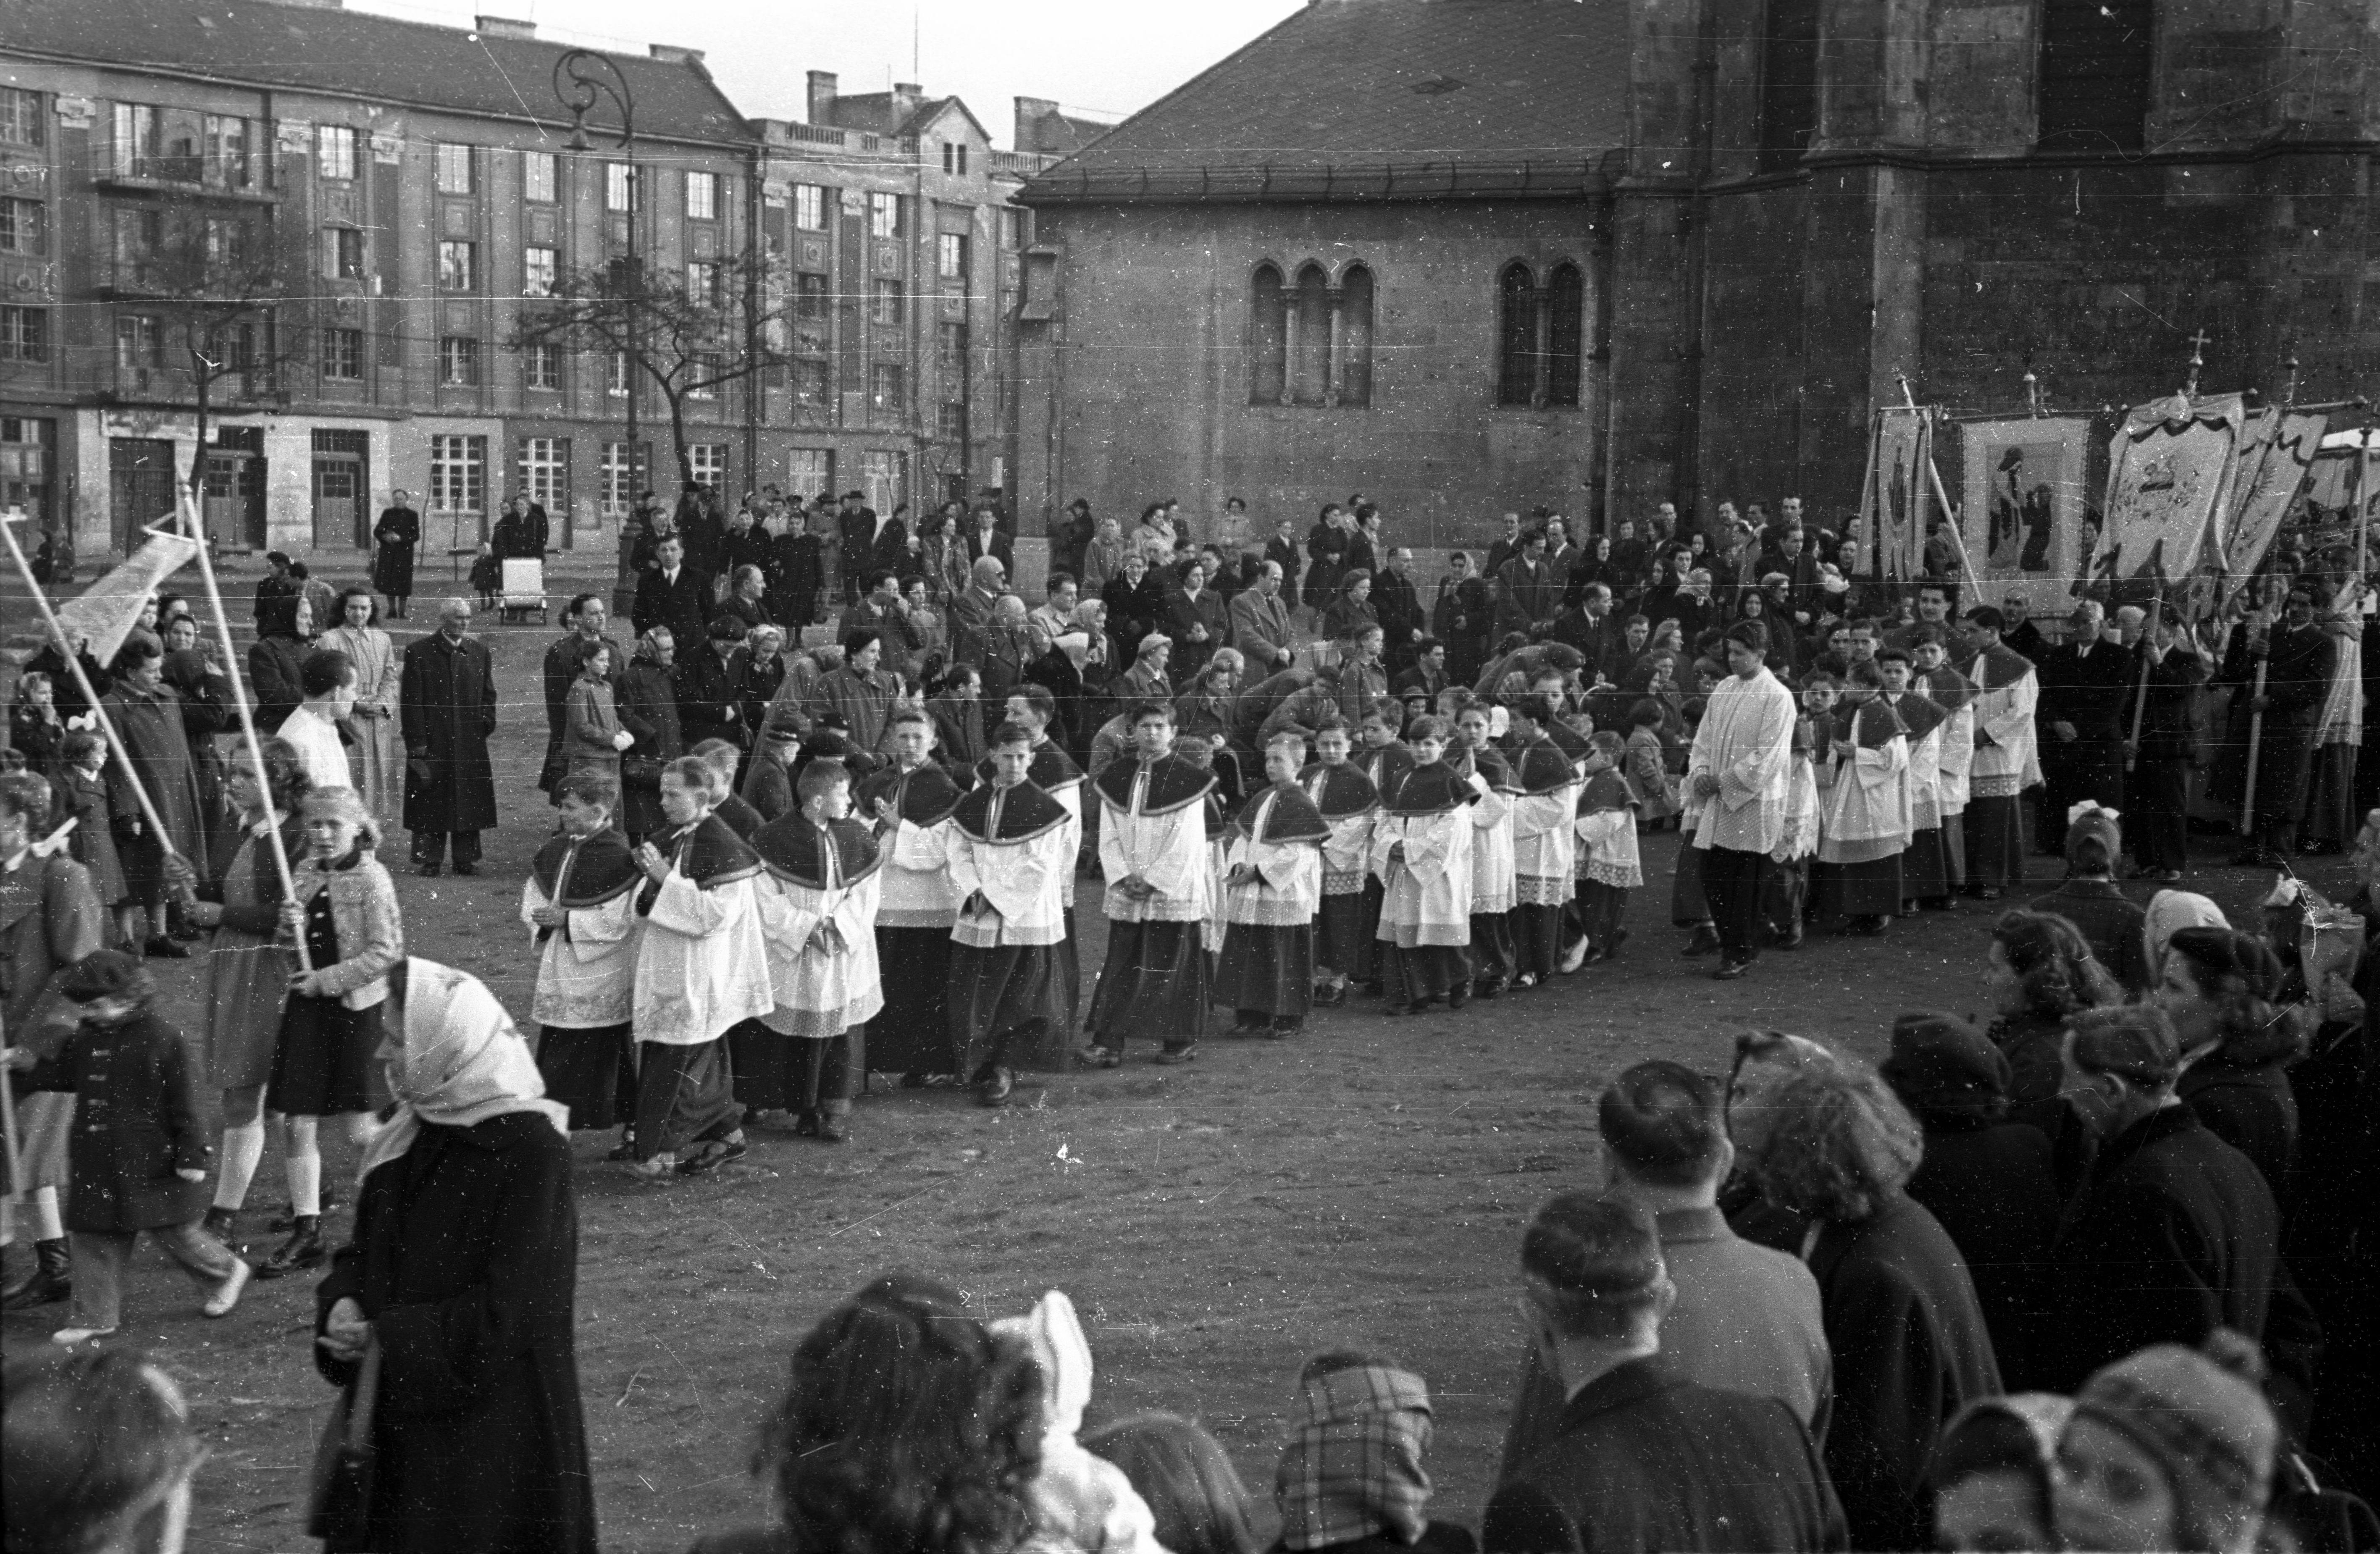 Procession at the Church of Margaret of Hungary in Lehel (Élmunkás) square in Budapet, 1954.